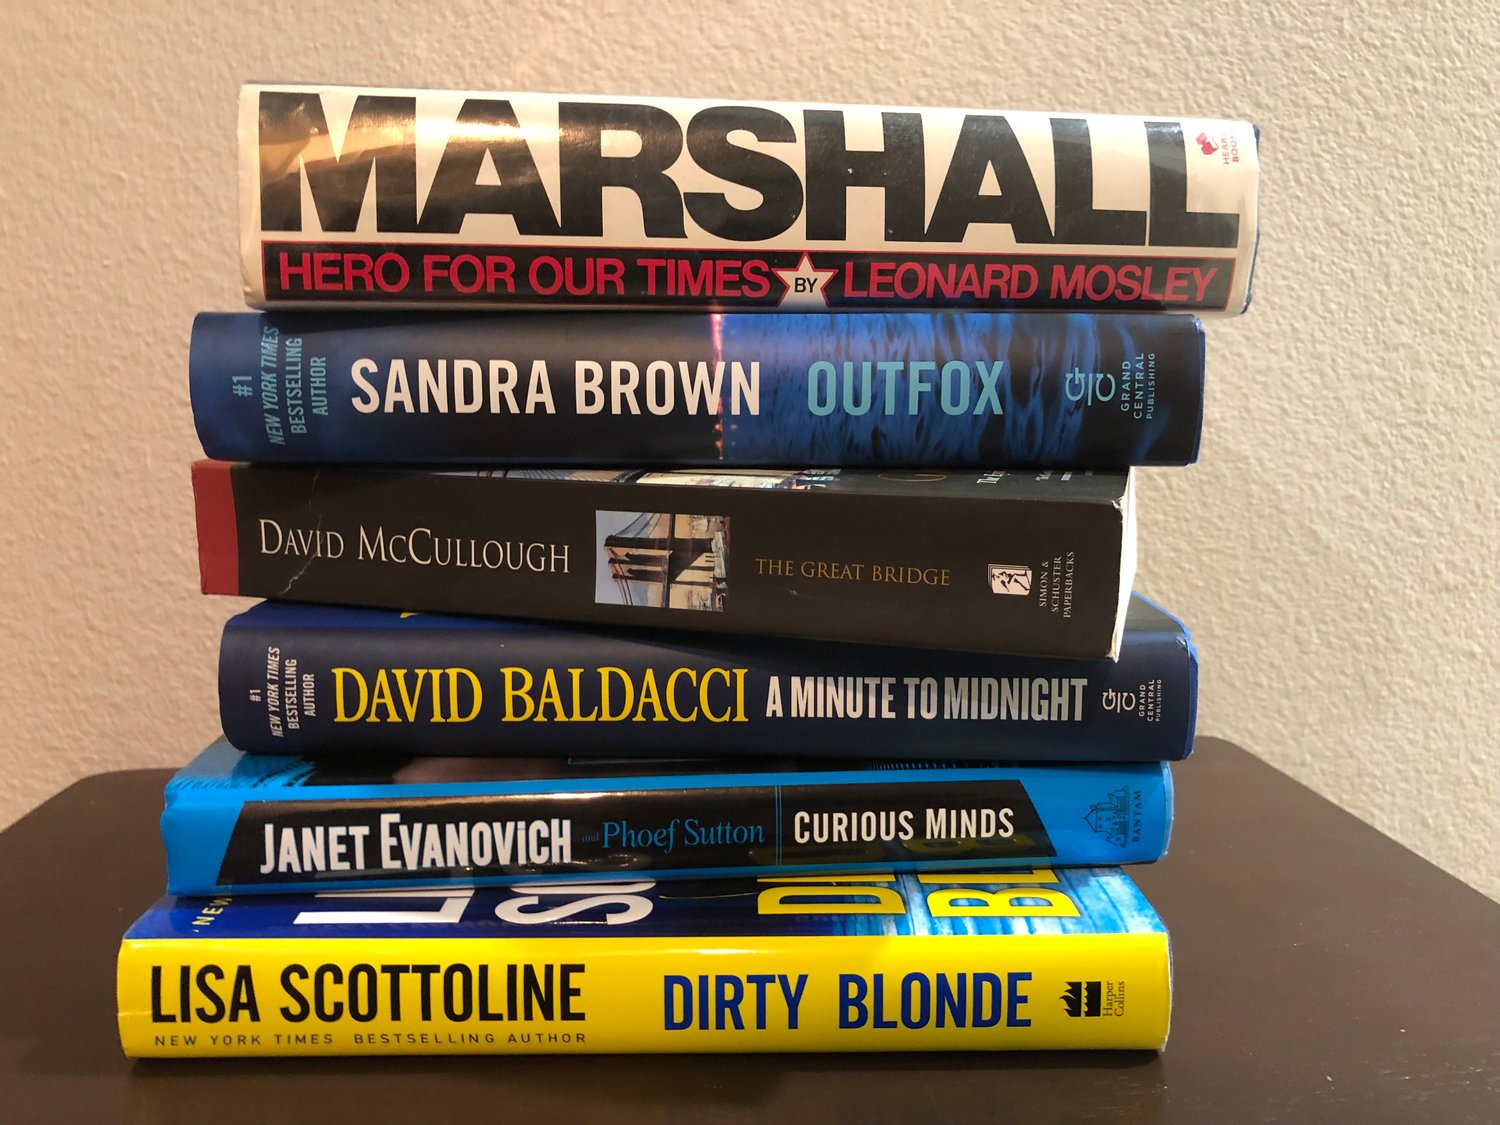 Used books such as these are available for purchase at the Friends of the Maud Marks Library Used Book Sale, set for Jan. 29 at the library, 1815 Westgreen Blvd.